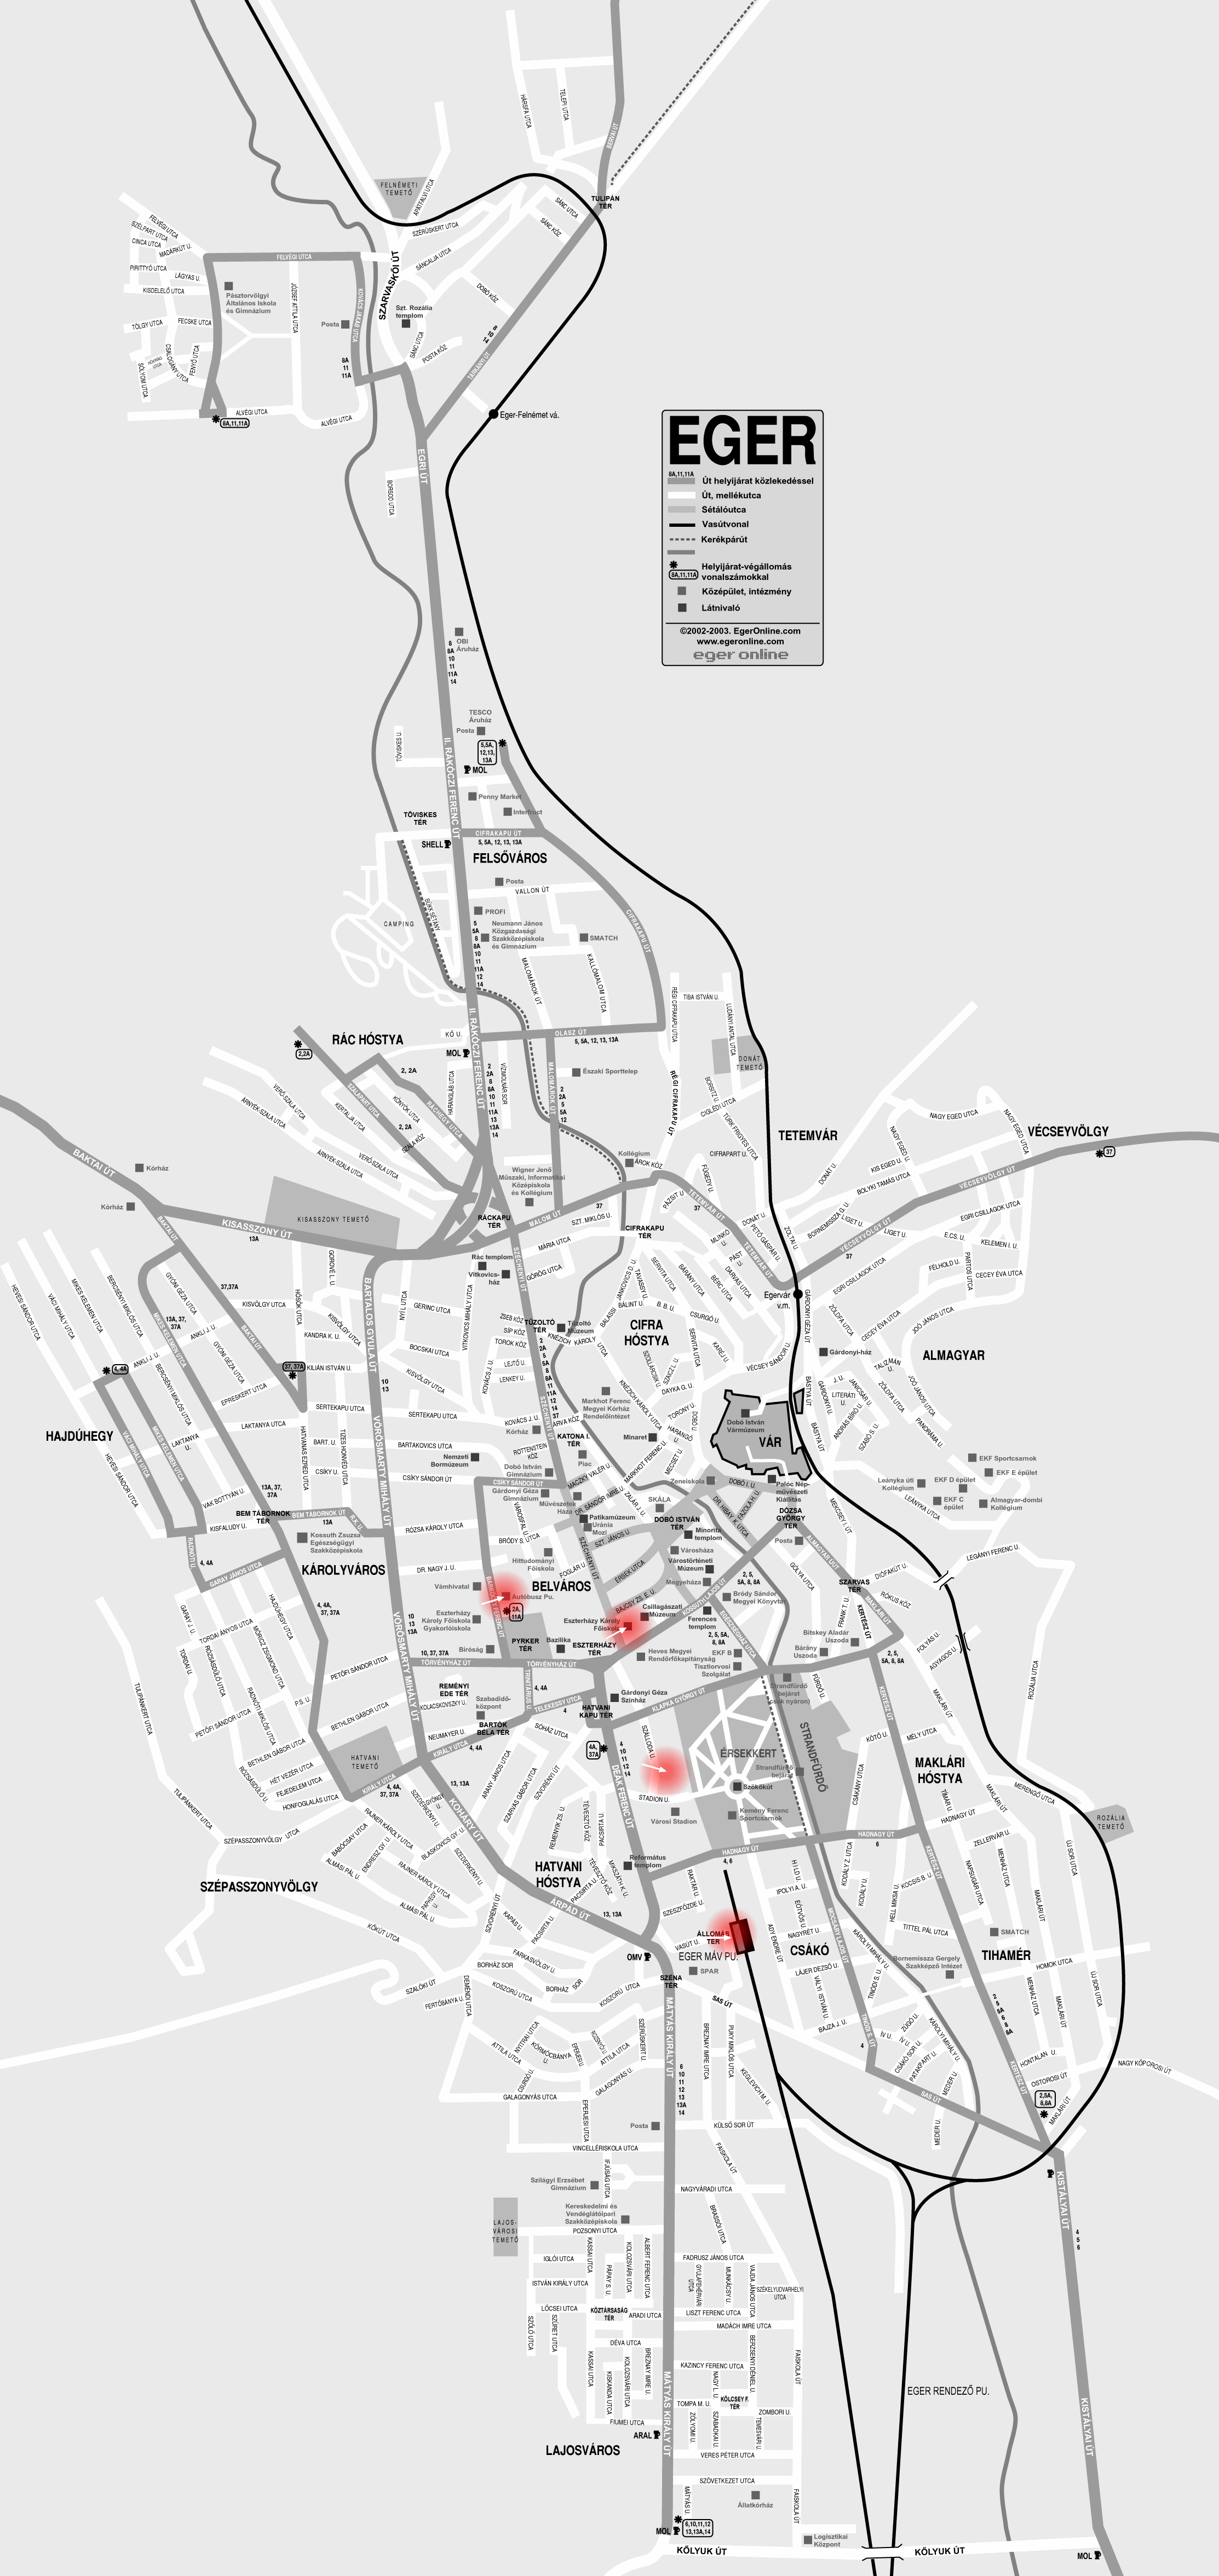 Map of Eger